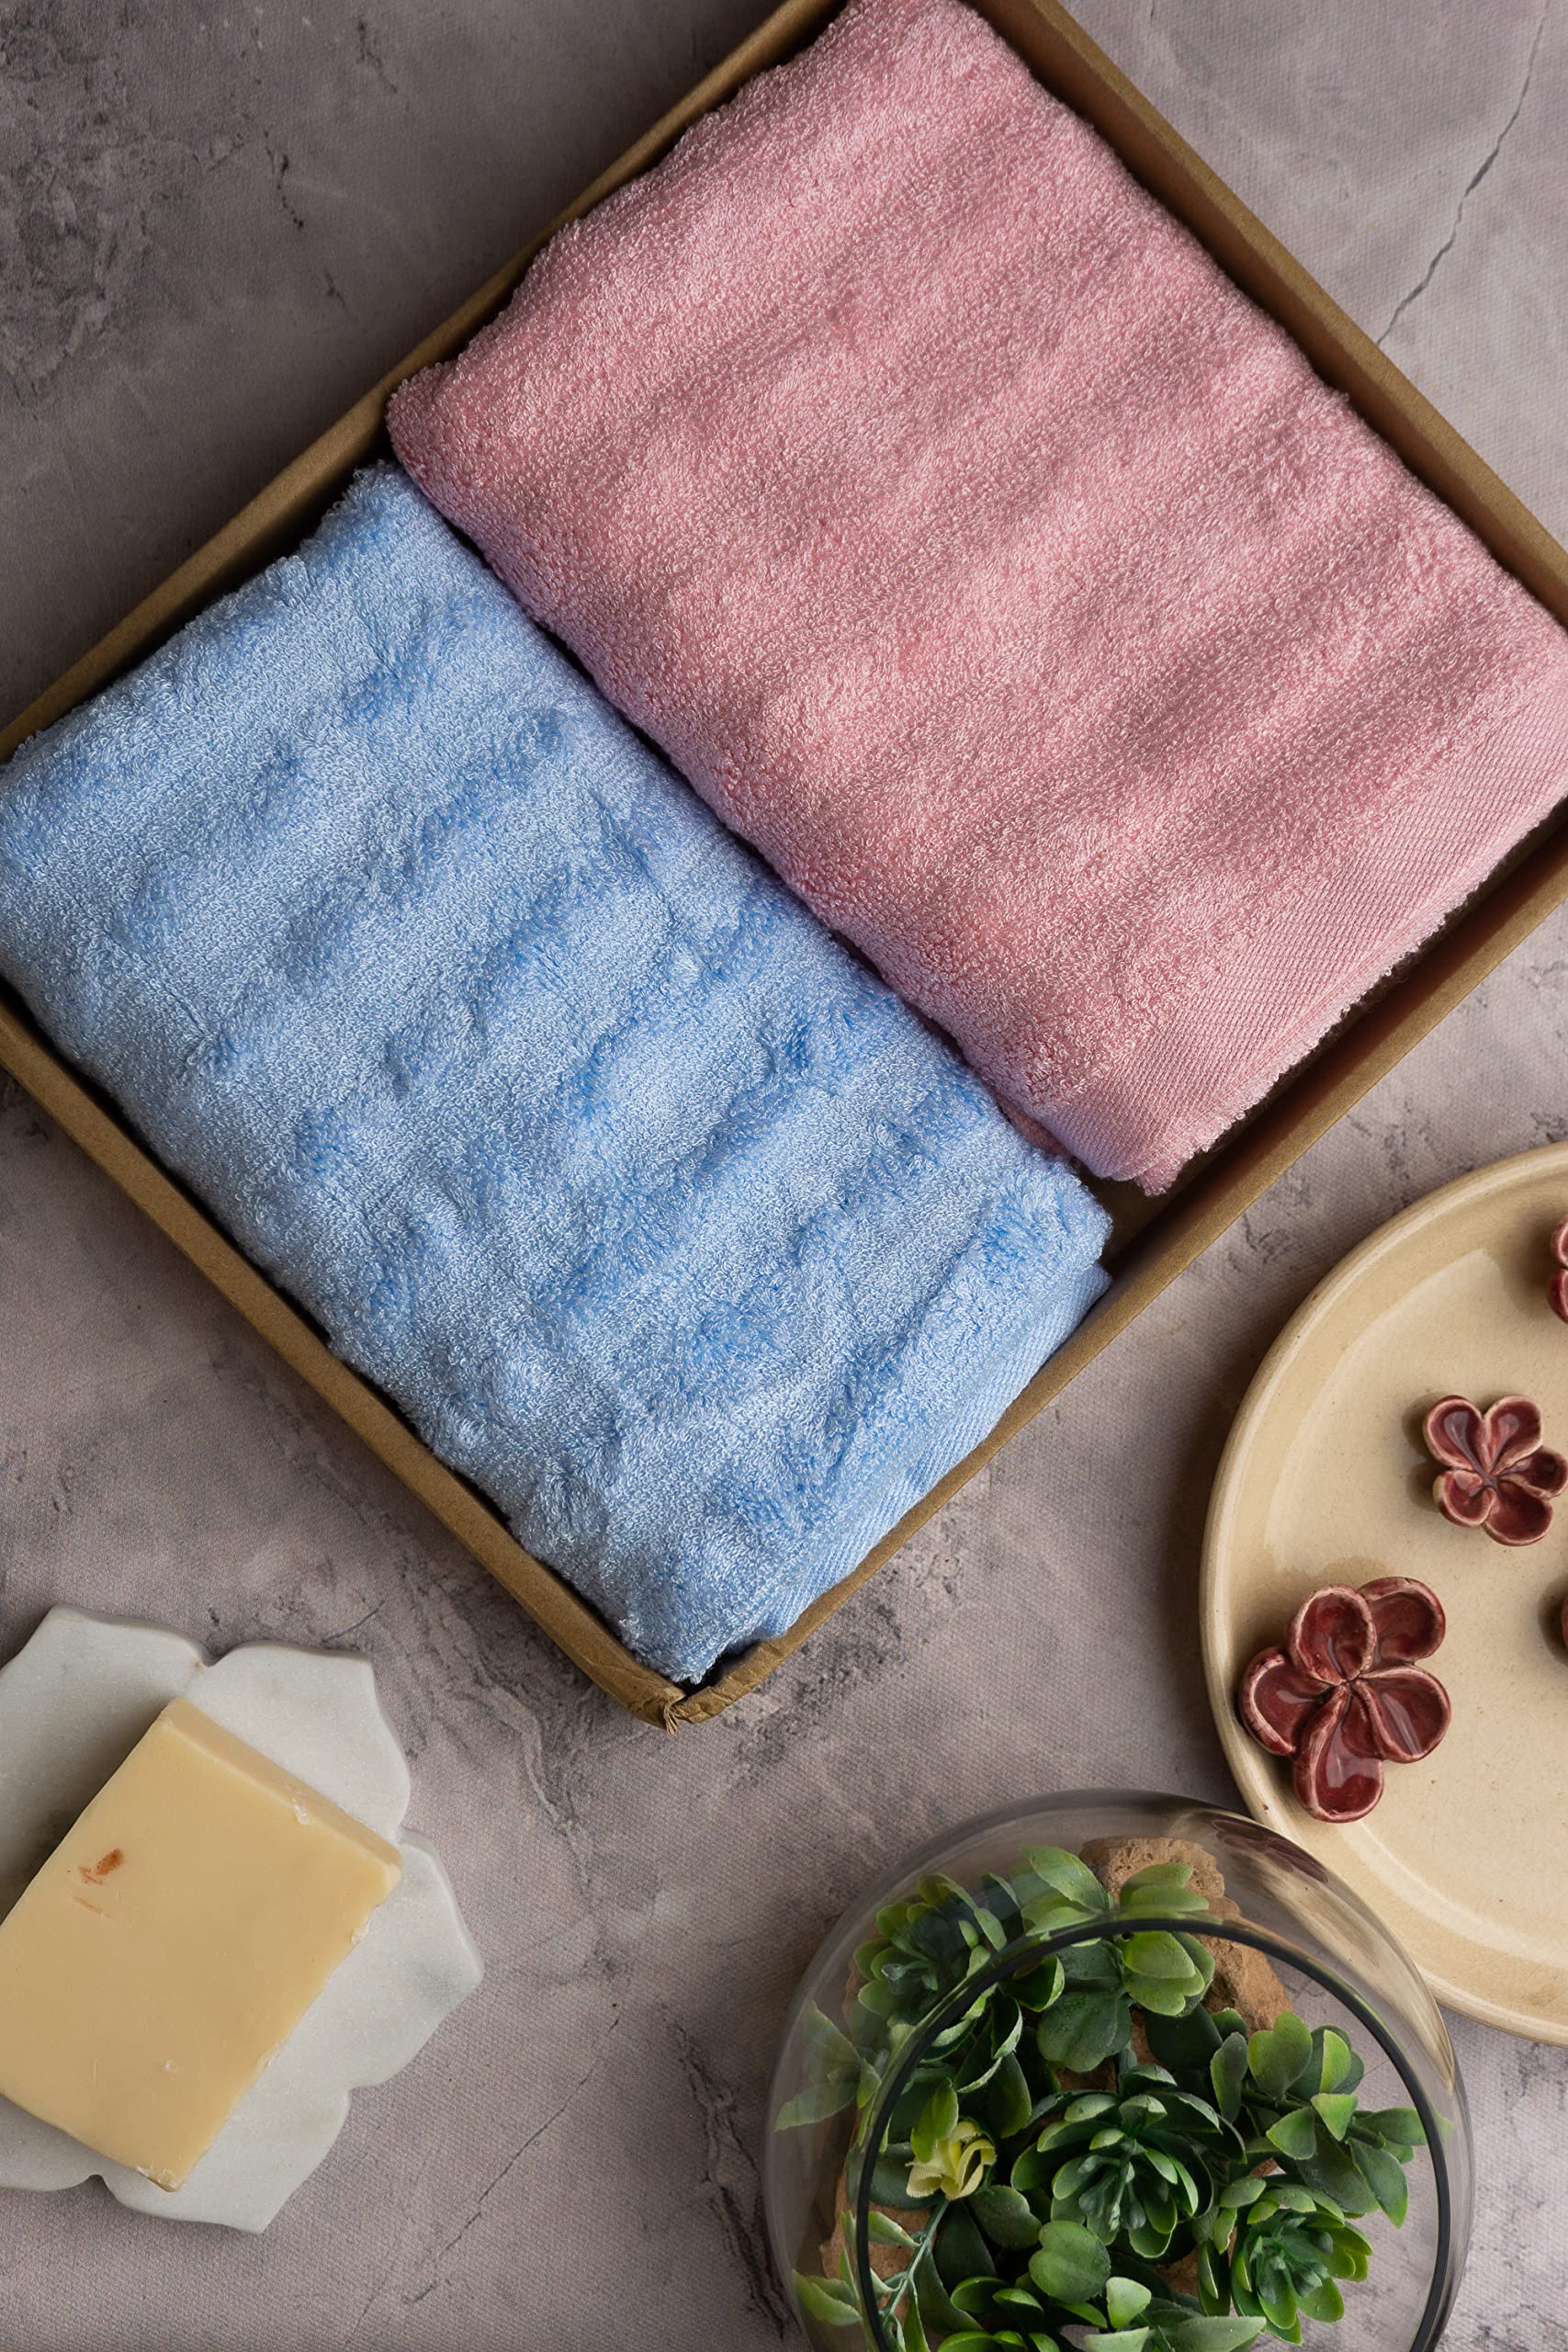 Mush 600 GSM Hand Towel Set of 6 | 100% Bamboo |Ultra Soft, Absorbent & Quick Dry Towel for Bath, Gym, Pool, Travel, Spa and Yoga | 29.5 x 14 Inches (6, Sky Blue,Pink)